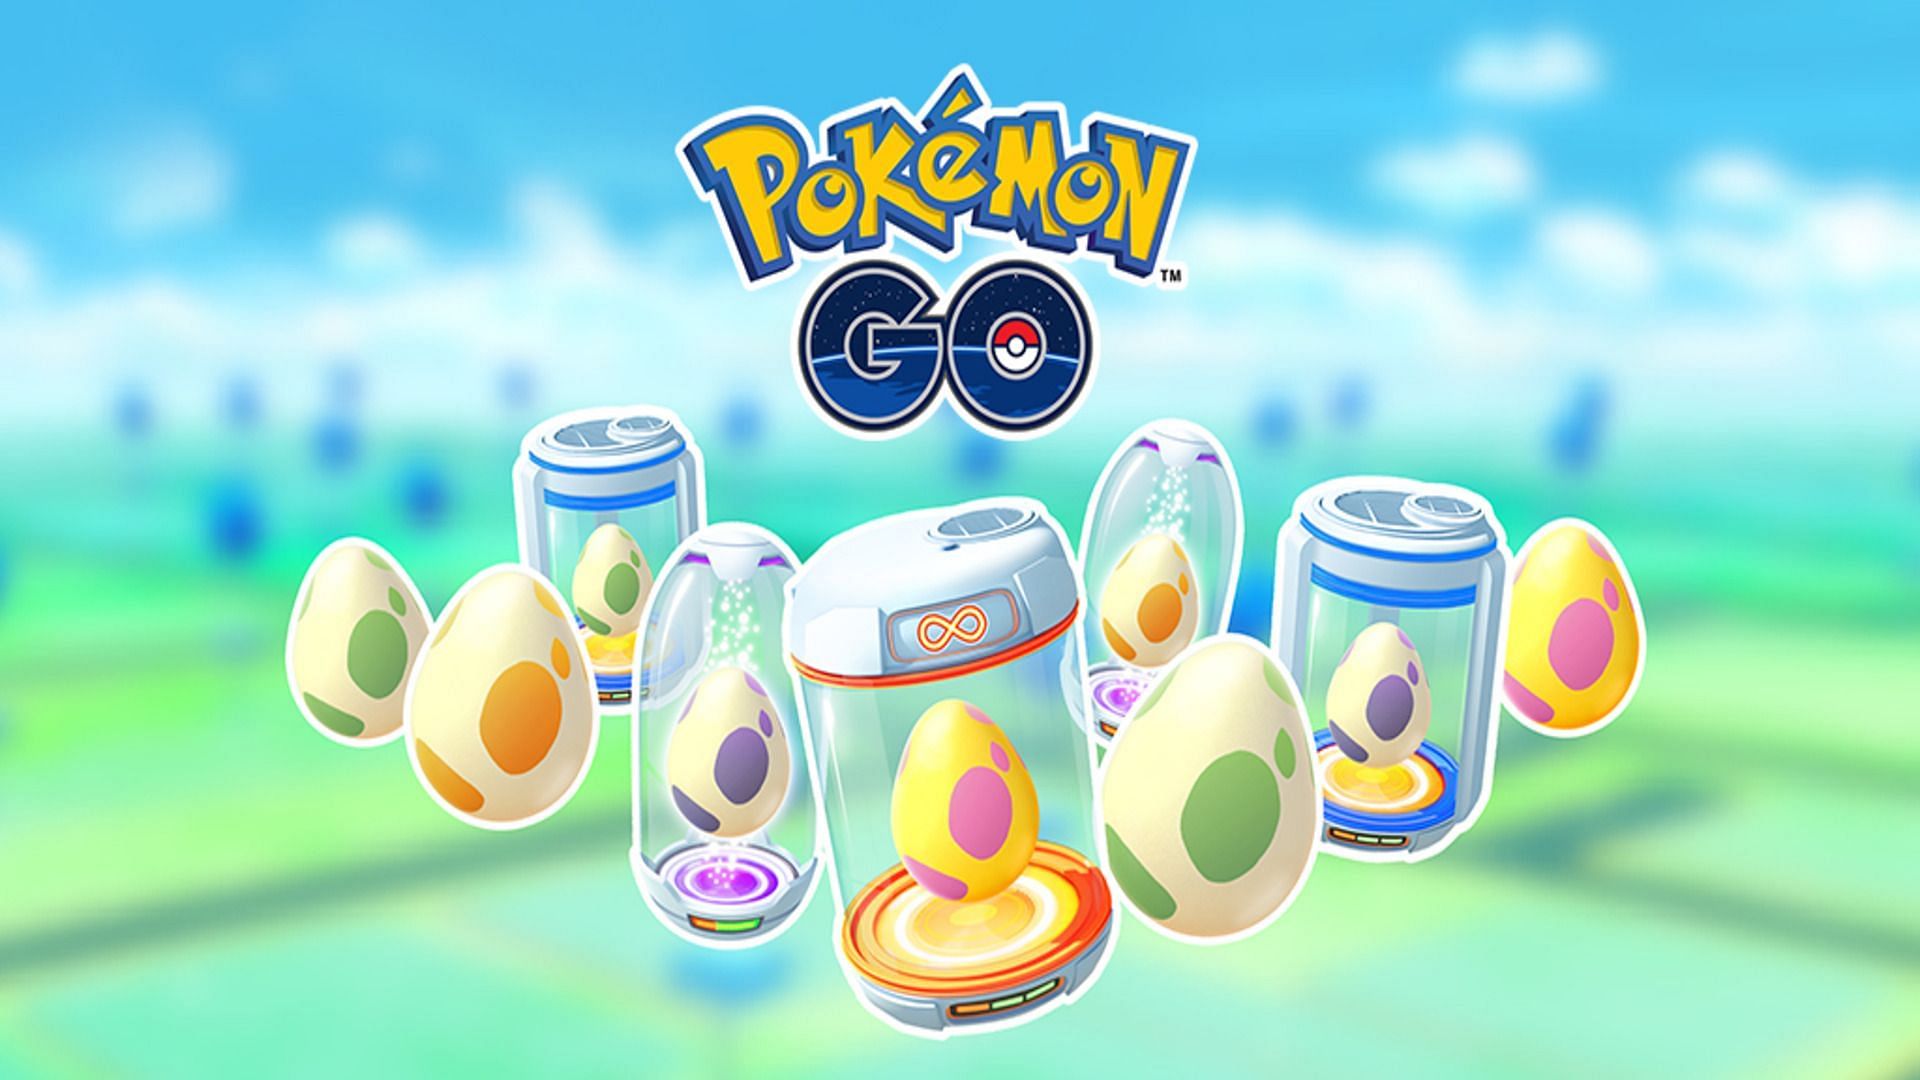 Official imagery showcasing eggs in Pokemon GO (Image via Niantic)